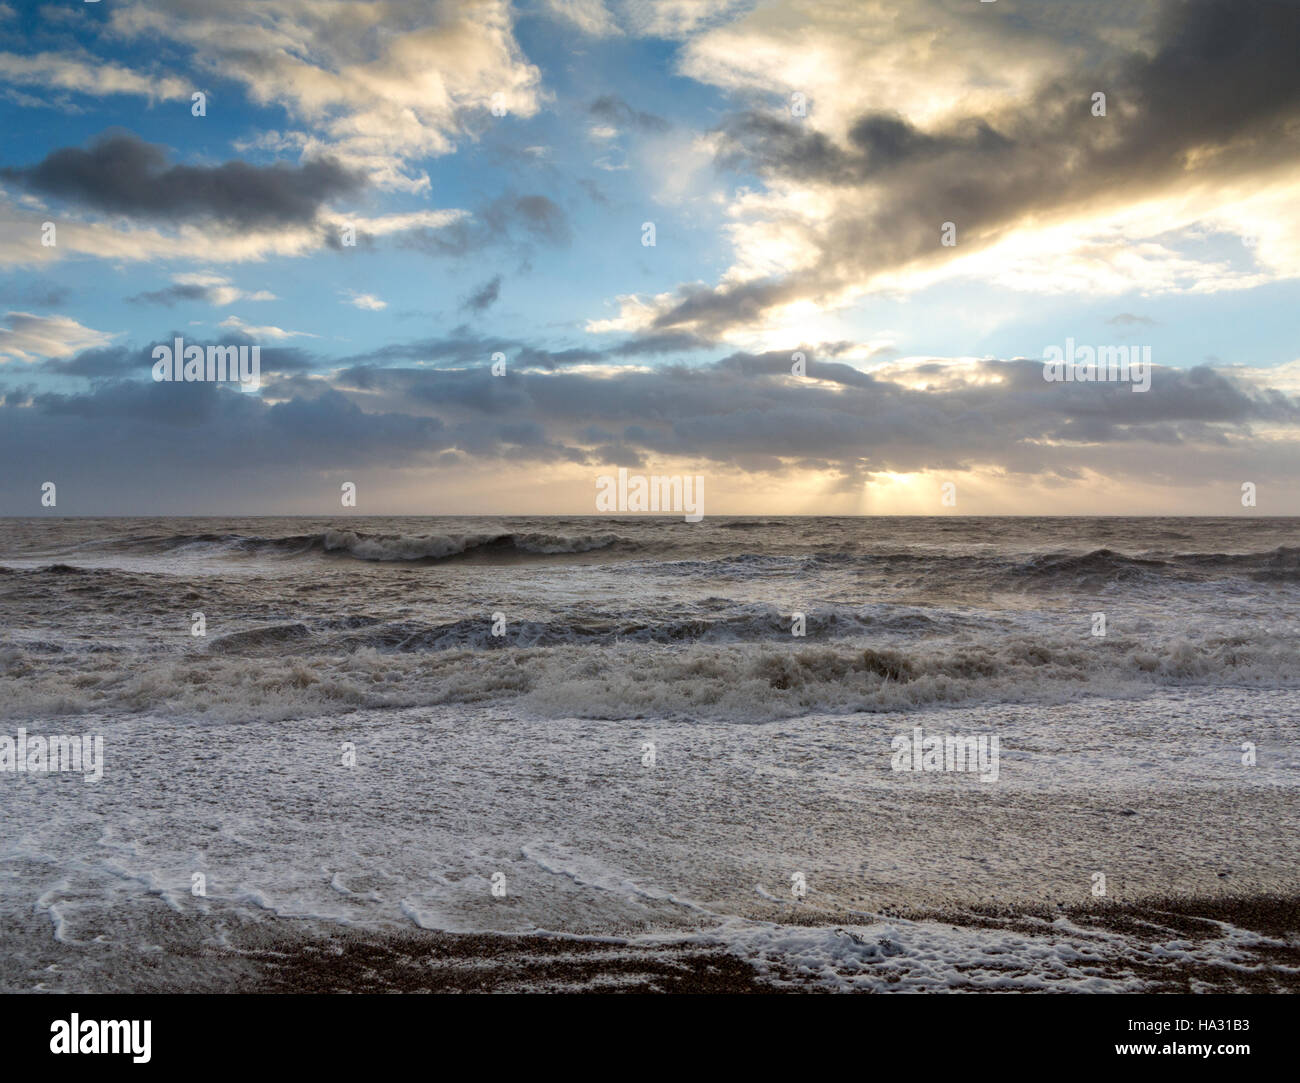 Churning waves breaking on the shoreline during heavy winds and spray with foam in the foreground just after sun rise. Stock Photo